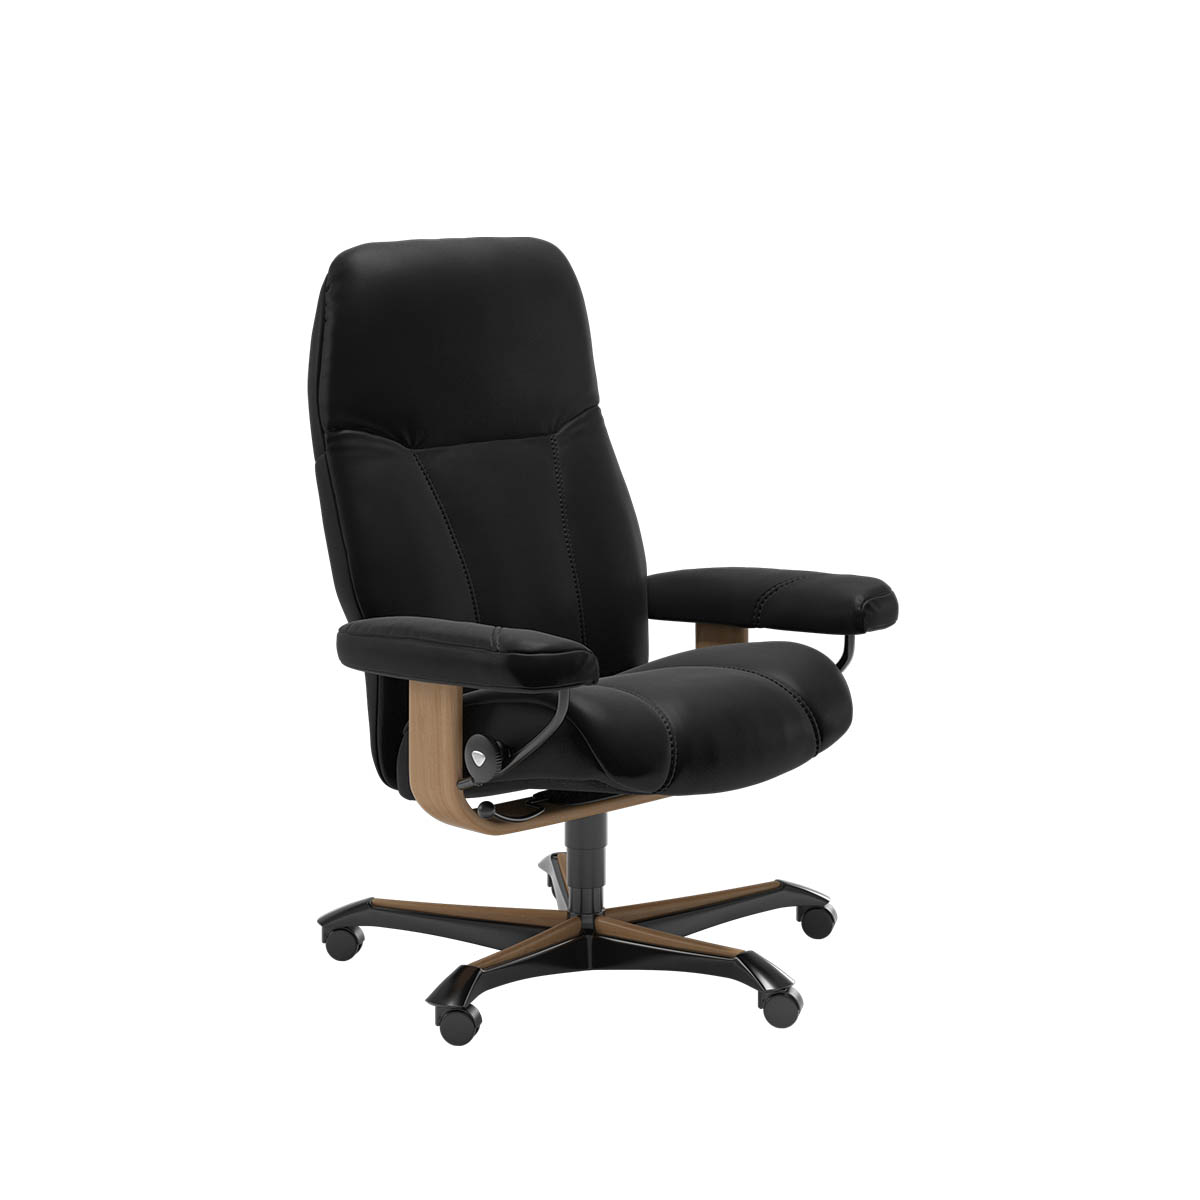 Consul Office Chairs Promotion